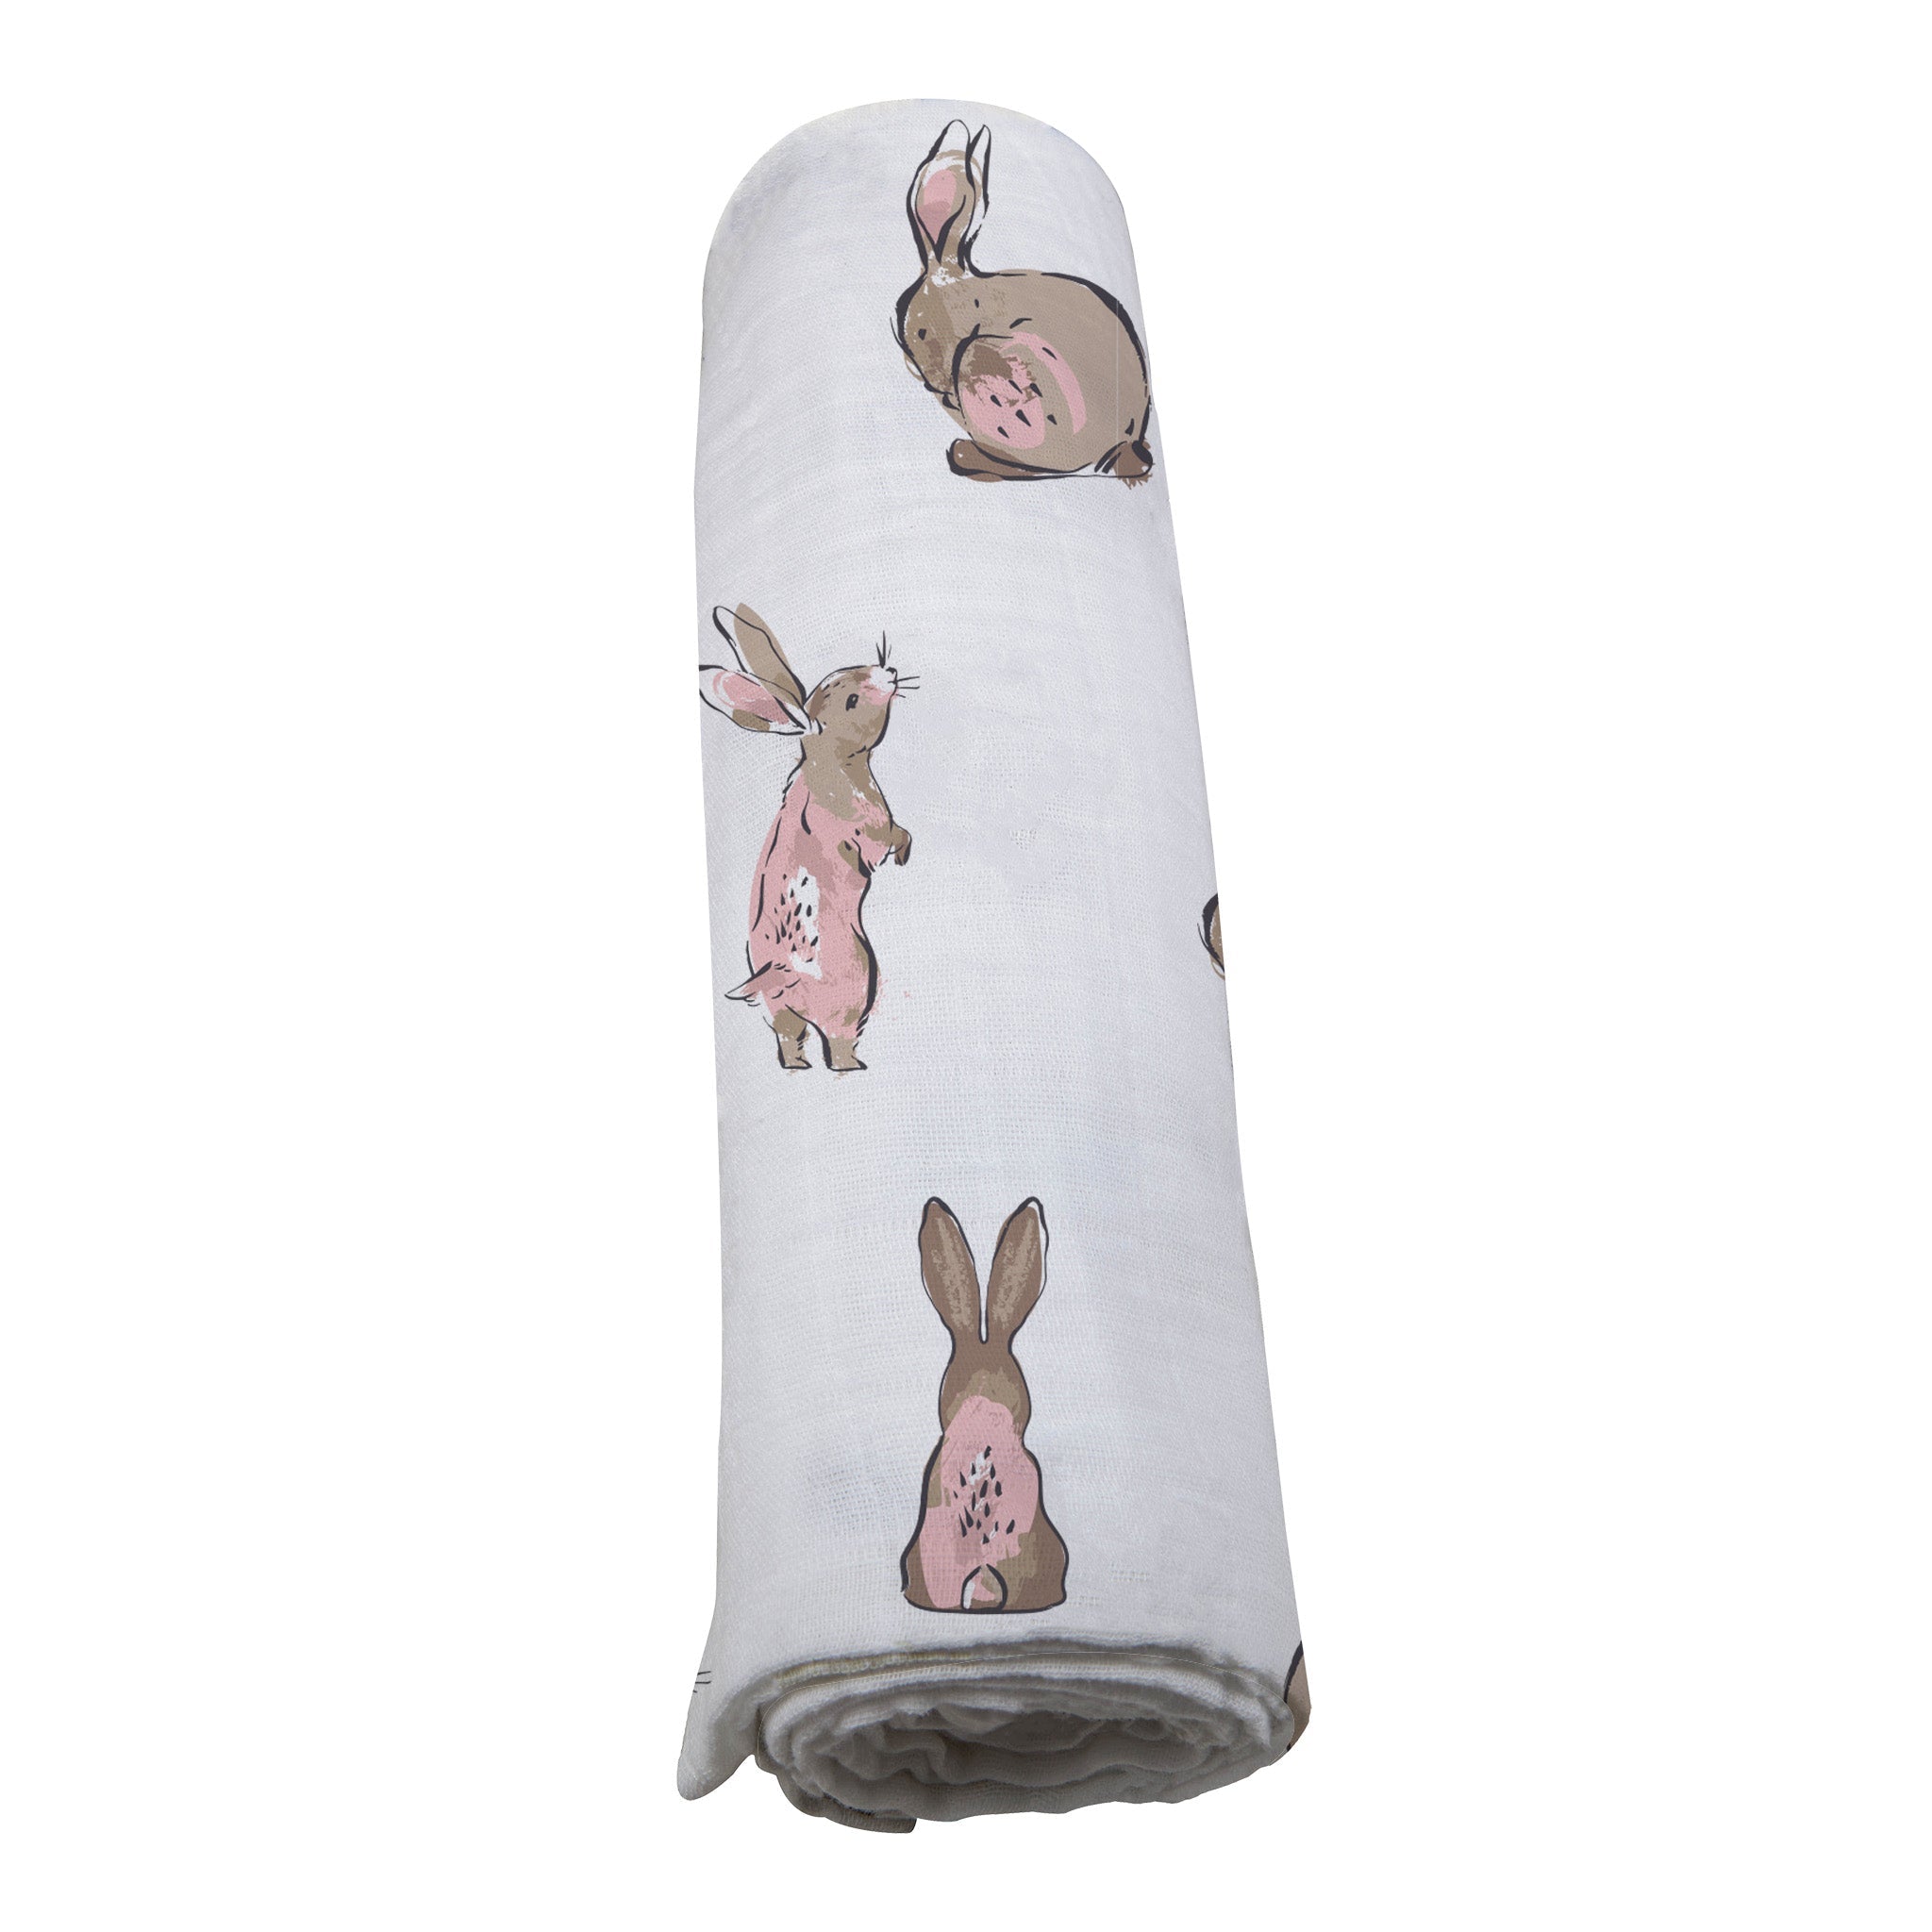 White baby swaddle with easter bunnies